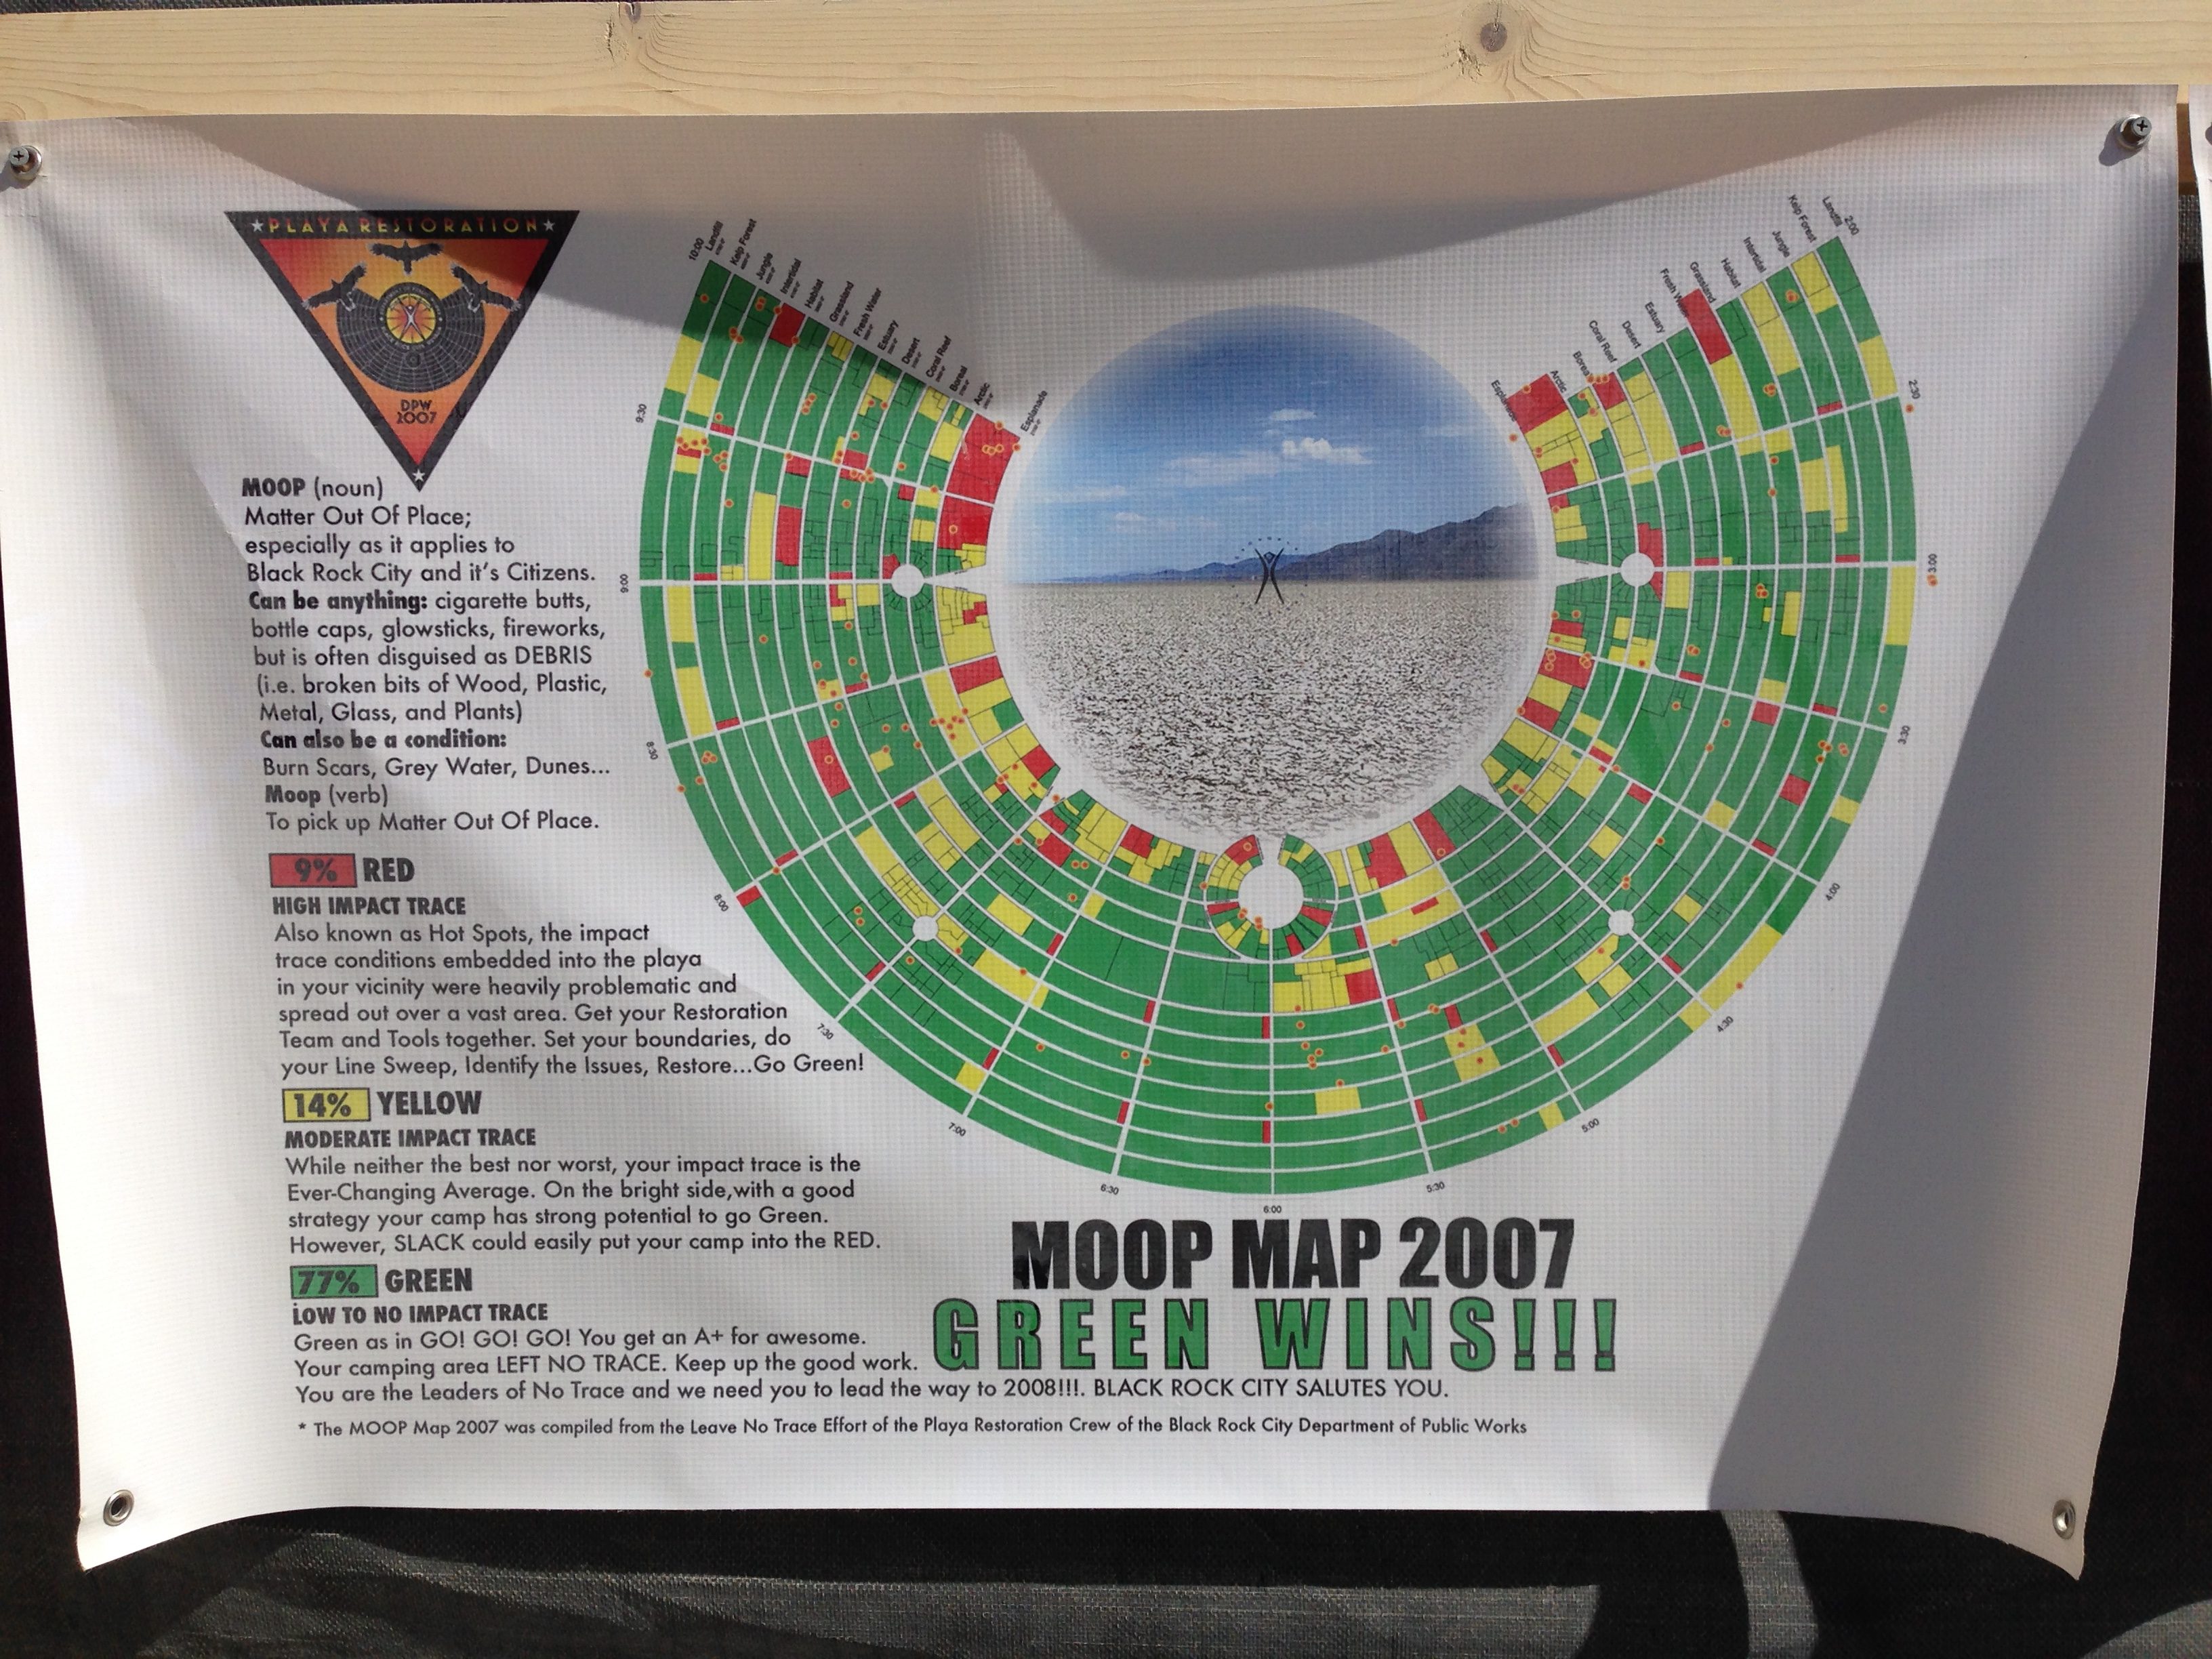 Moop Map 2007 "Green Wins!": Note how one year of measuring and enforcement has made a noticeable difference.